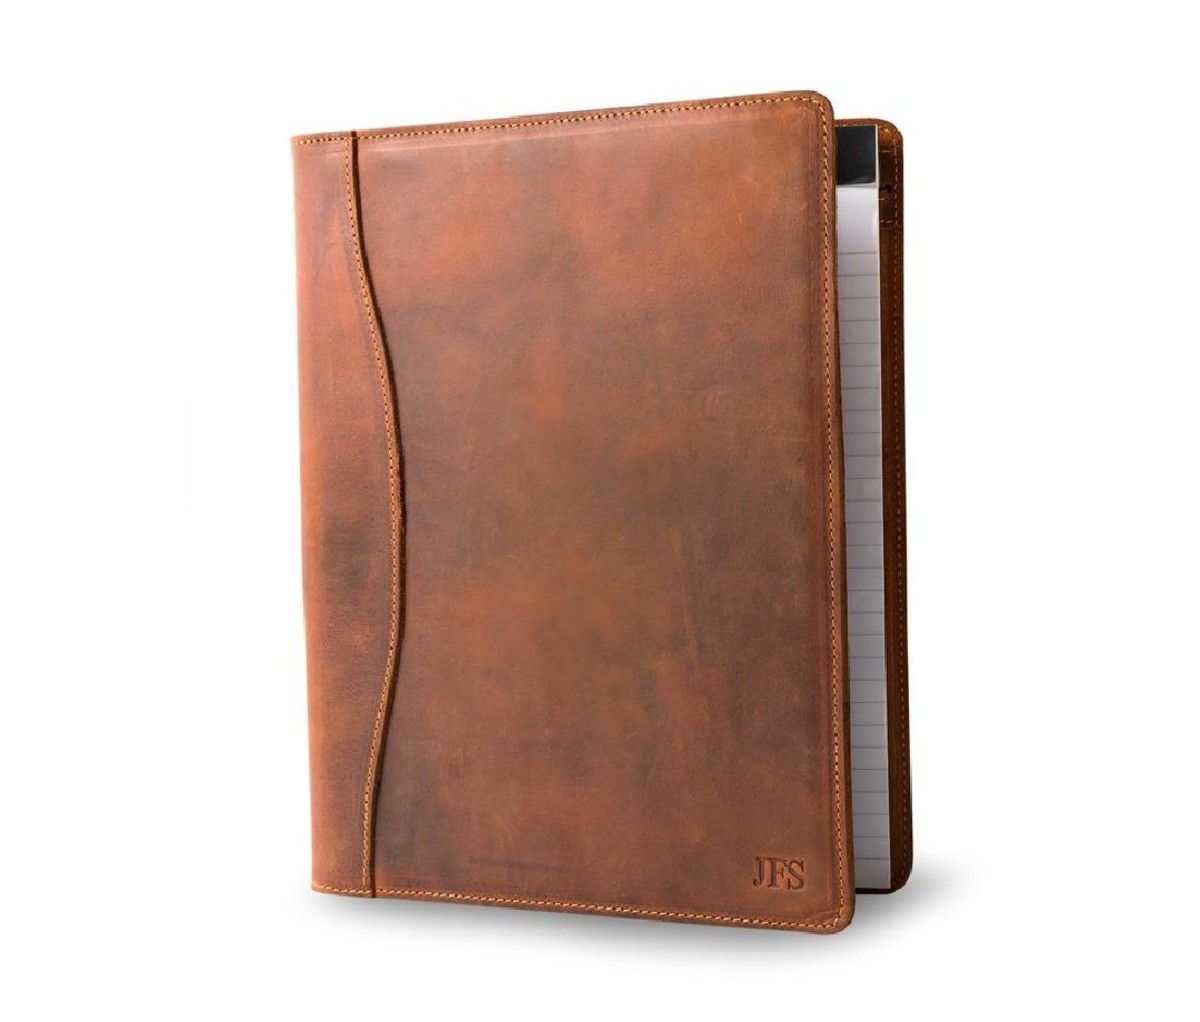 Pegai Marshall Leather Padfolio brown leather notebook holder